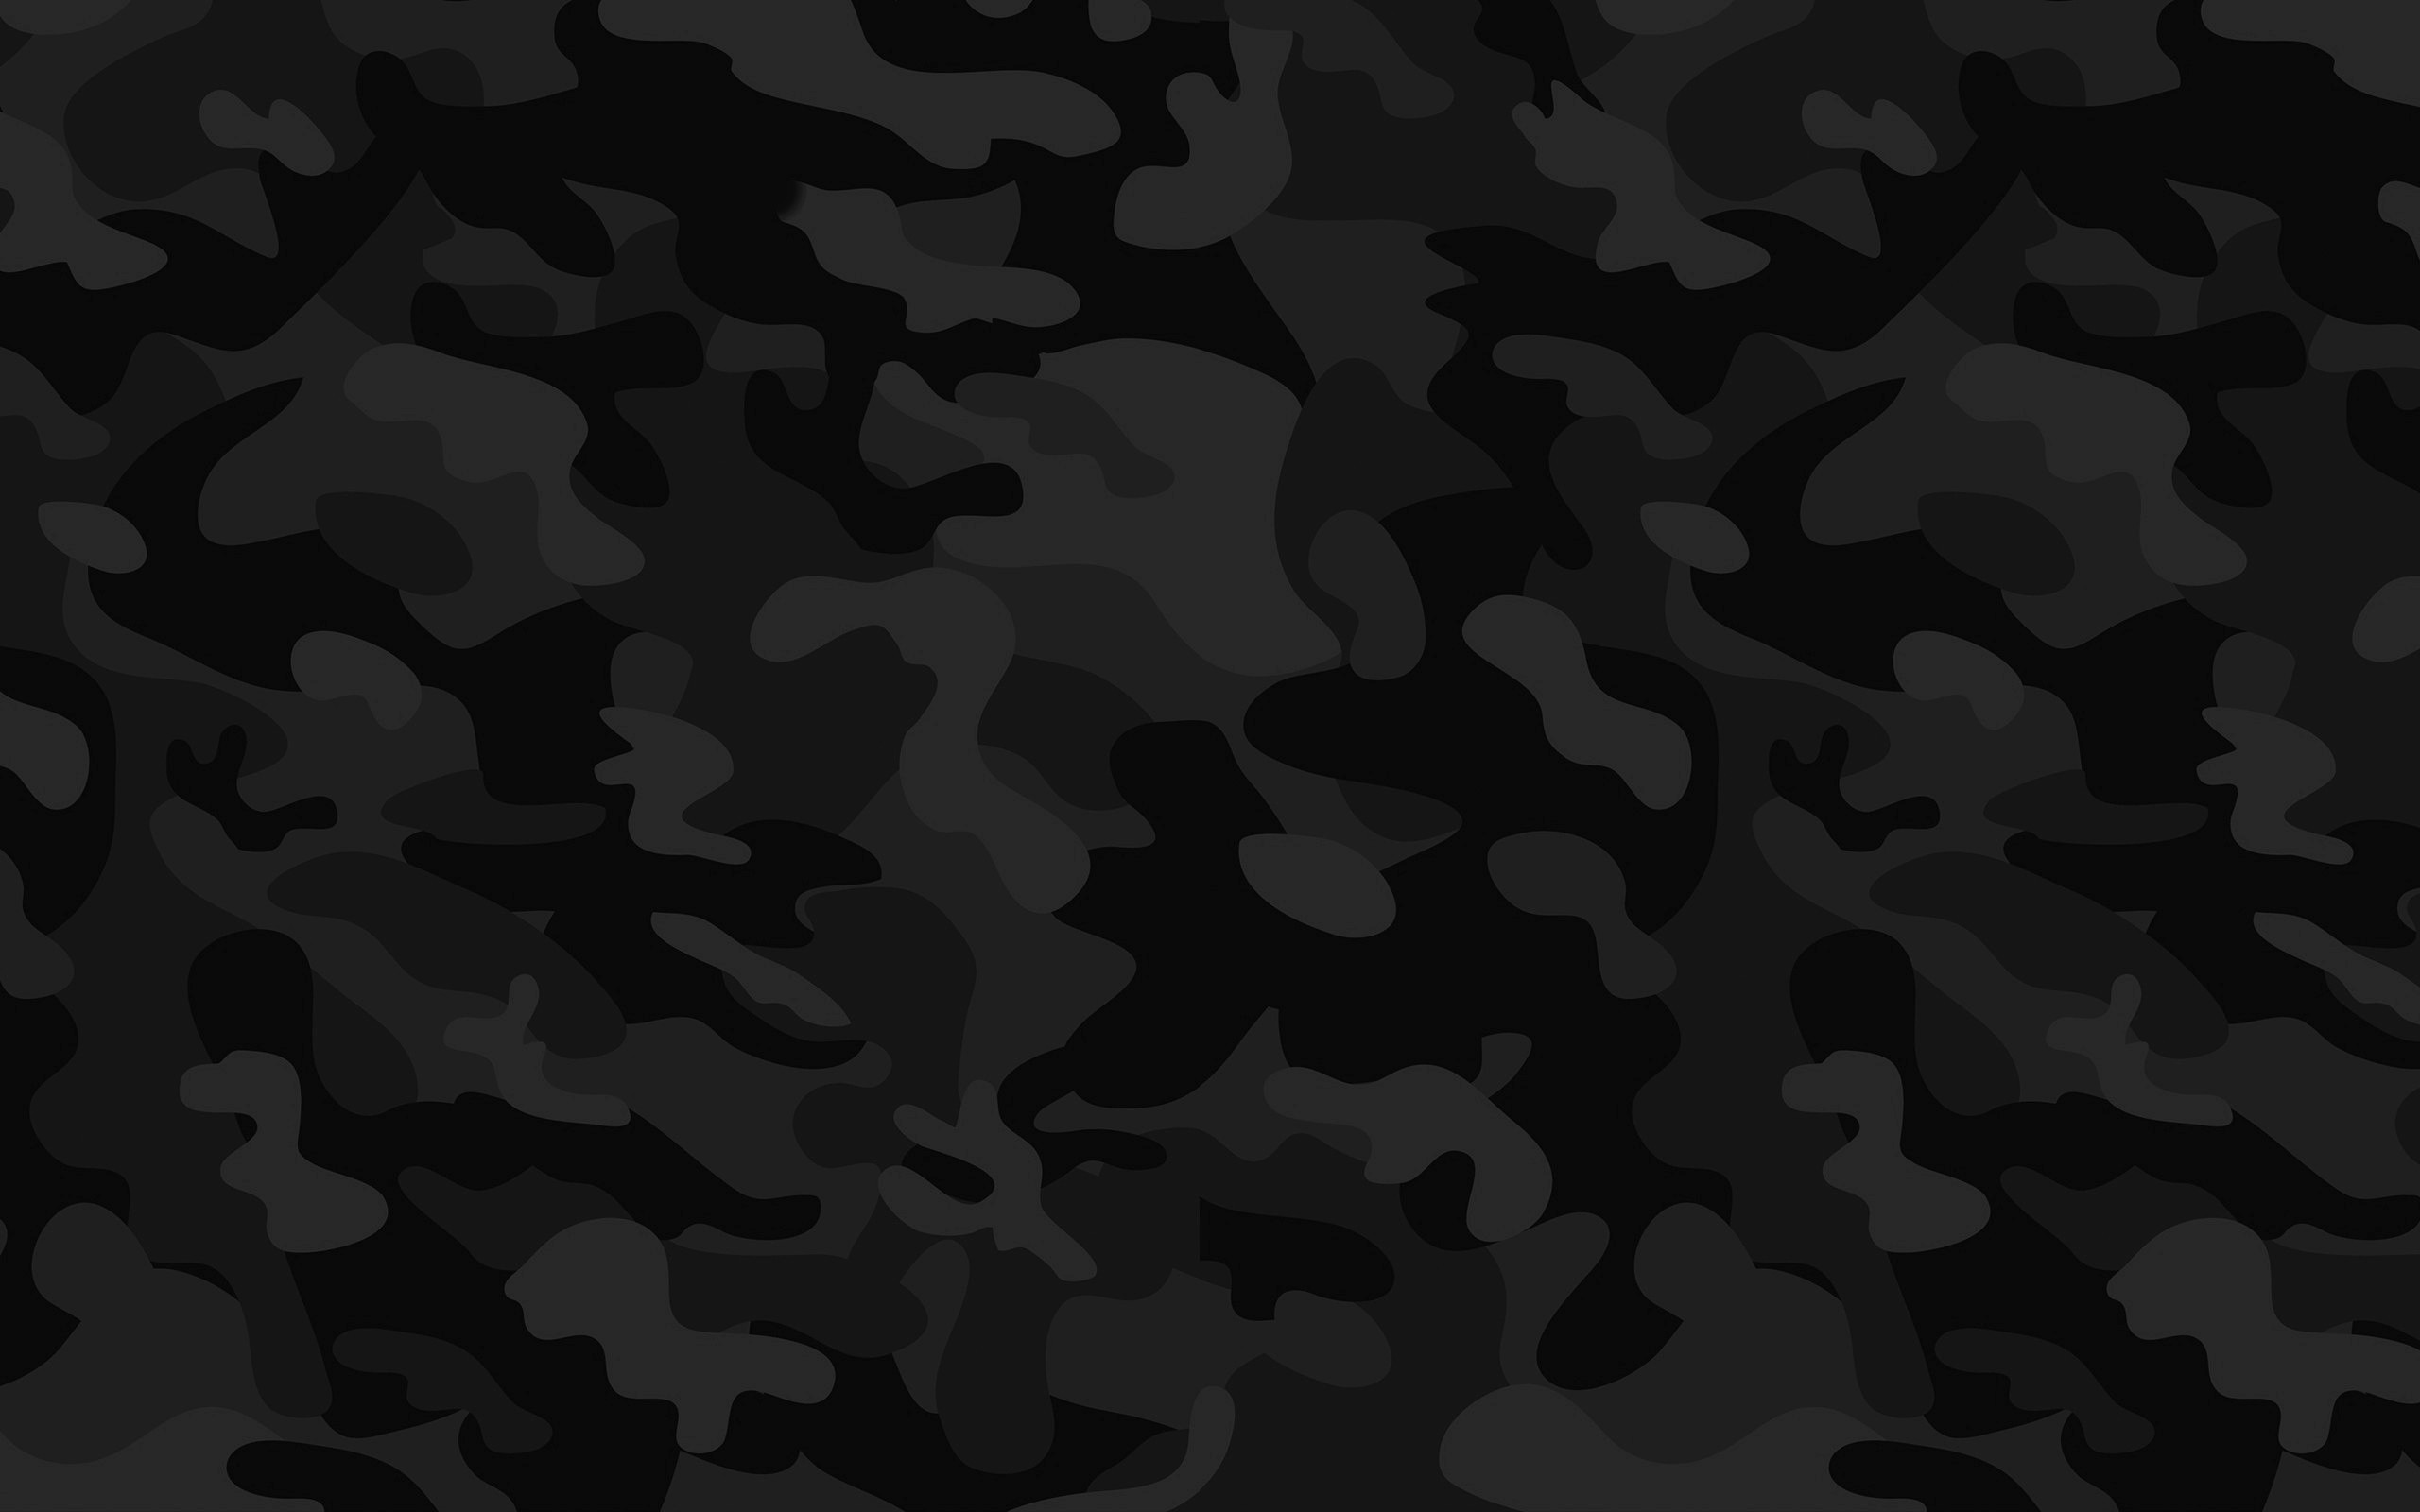 camouflage wallpaper,black,military camouflage,pattern,camouflage,brown